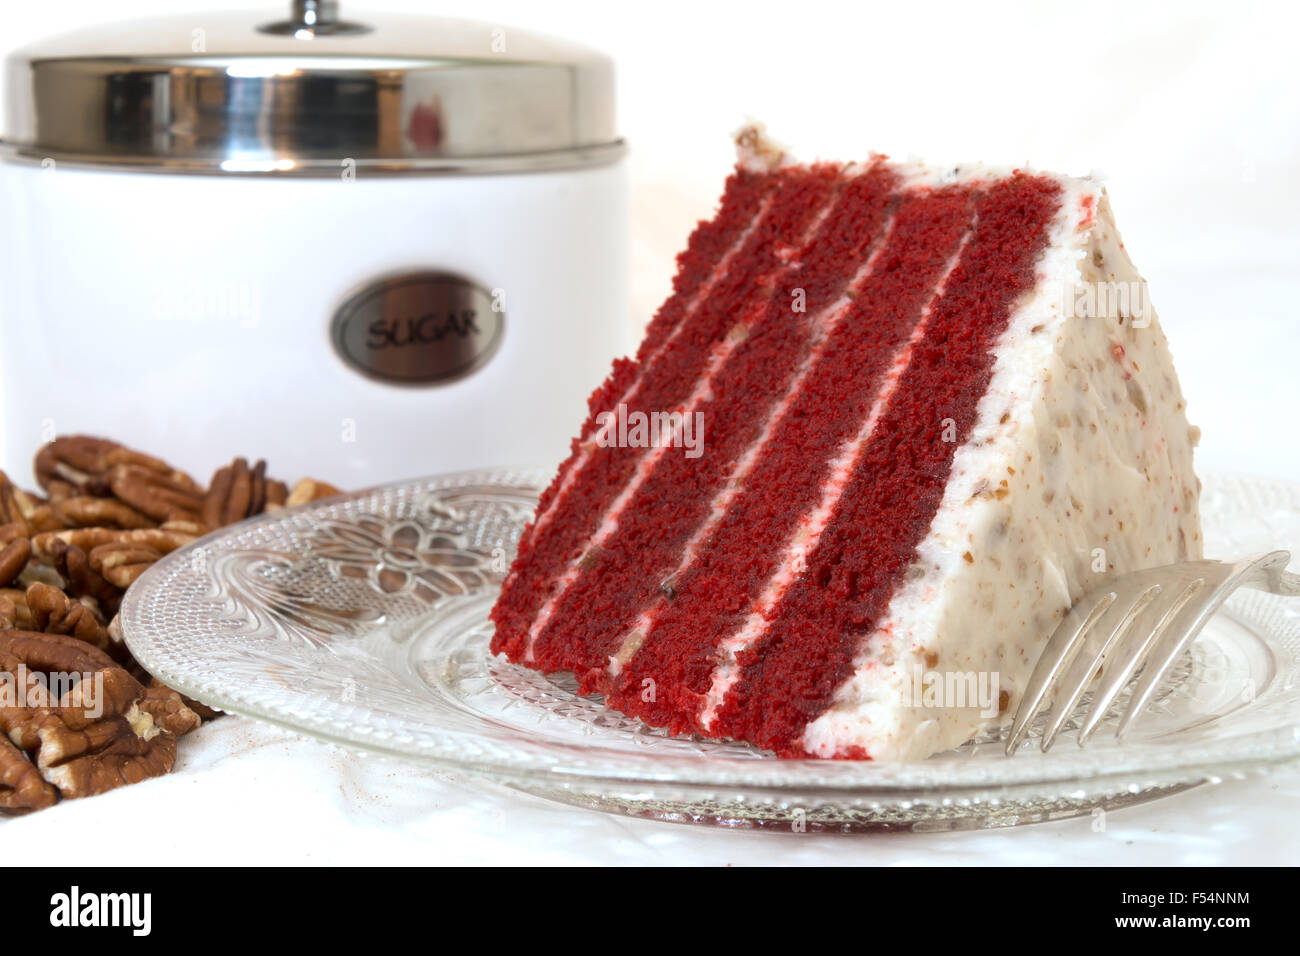 Slice of red velvet cake closeup with sliced pecans and sugar canister in background.   Isolated on white background. Stock Photo